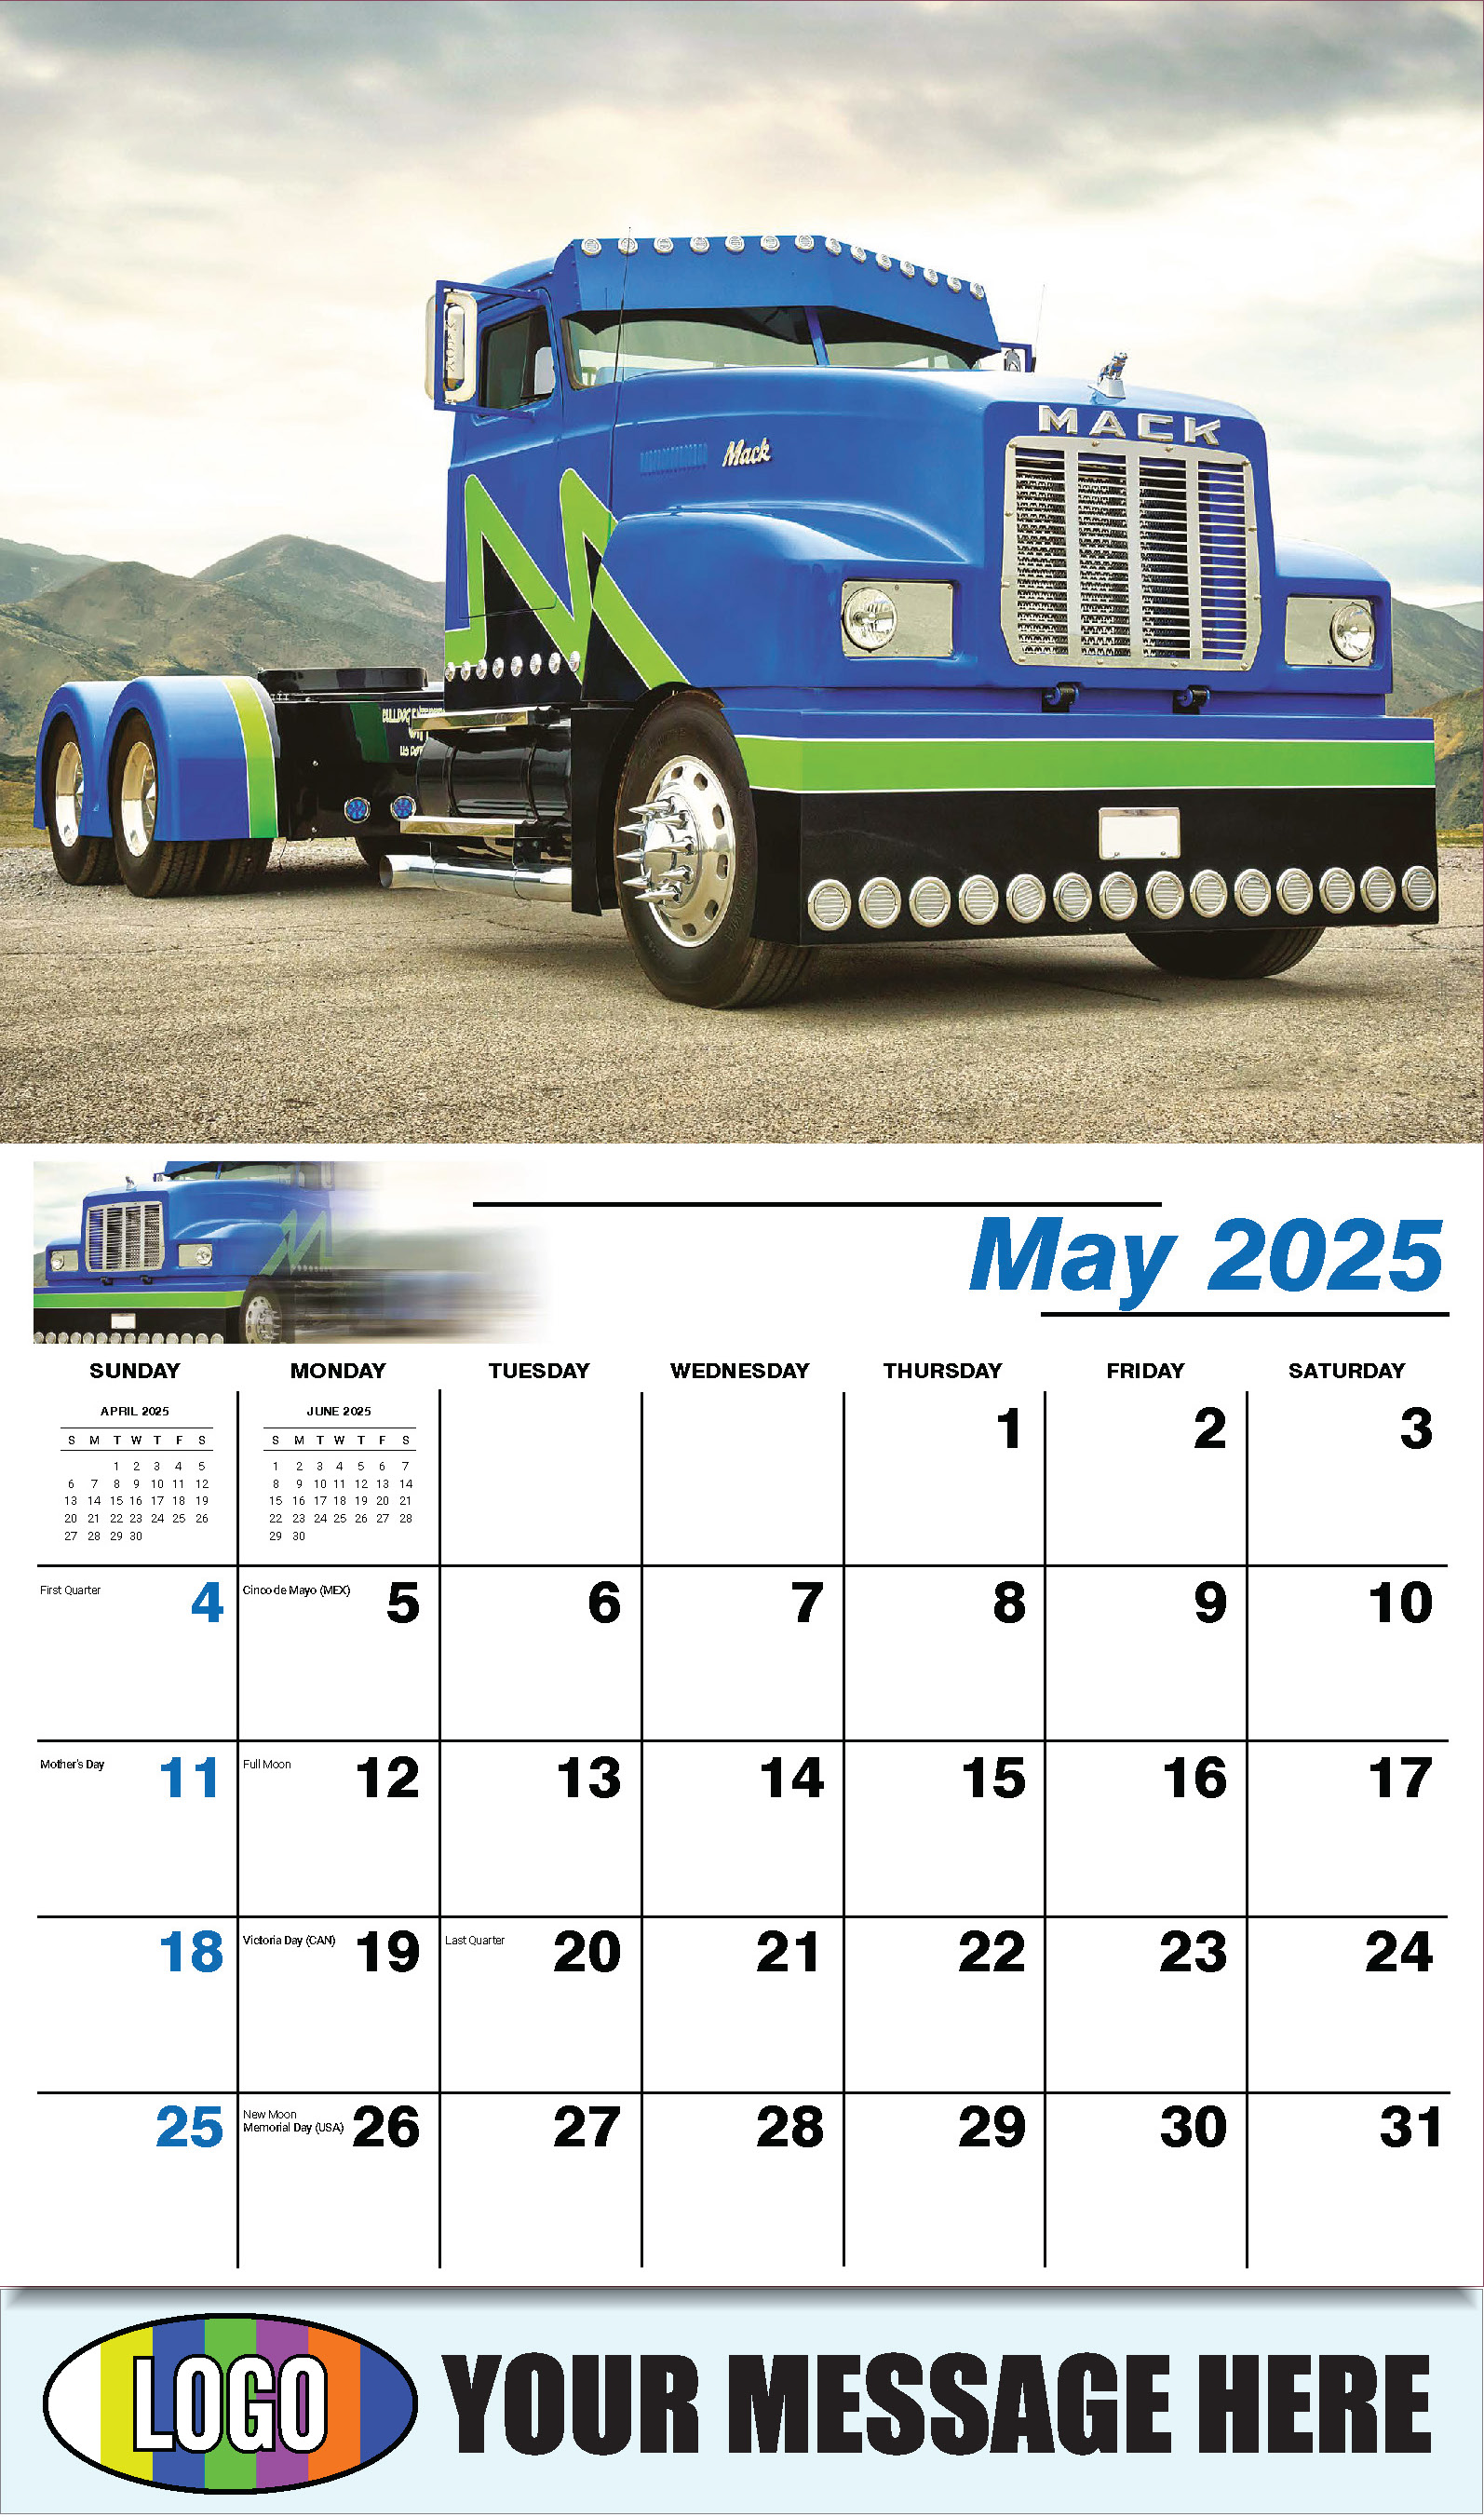 Kings of the Road 2025 Automotive Business Promotional Calendar - May